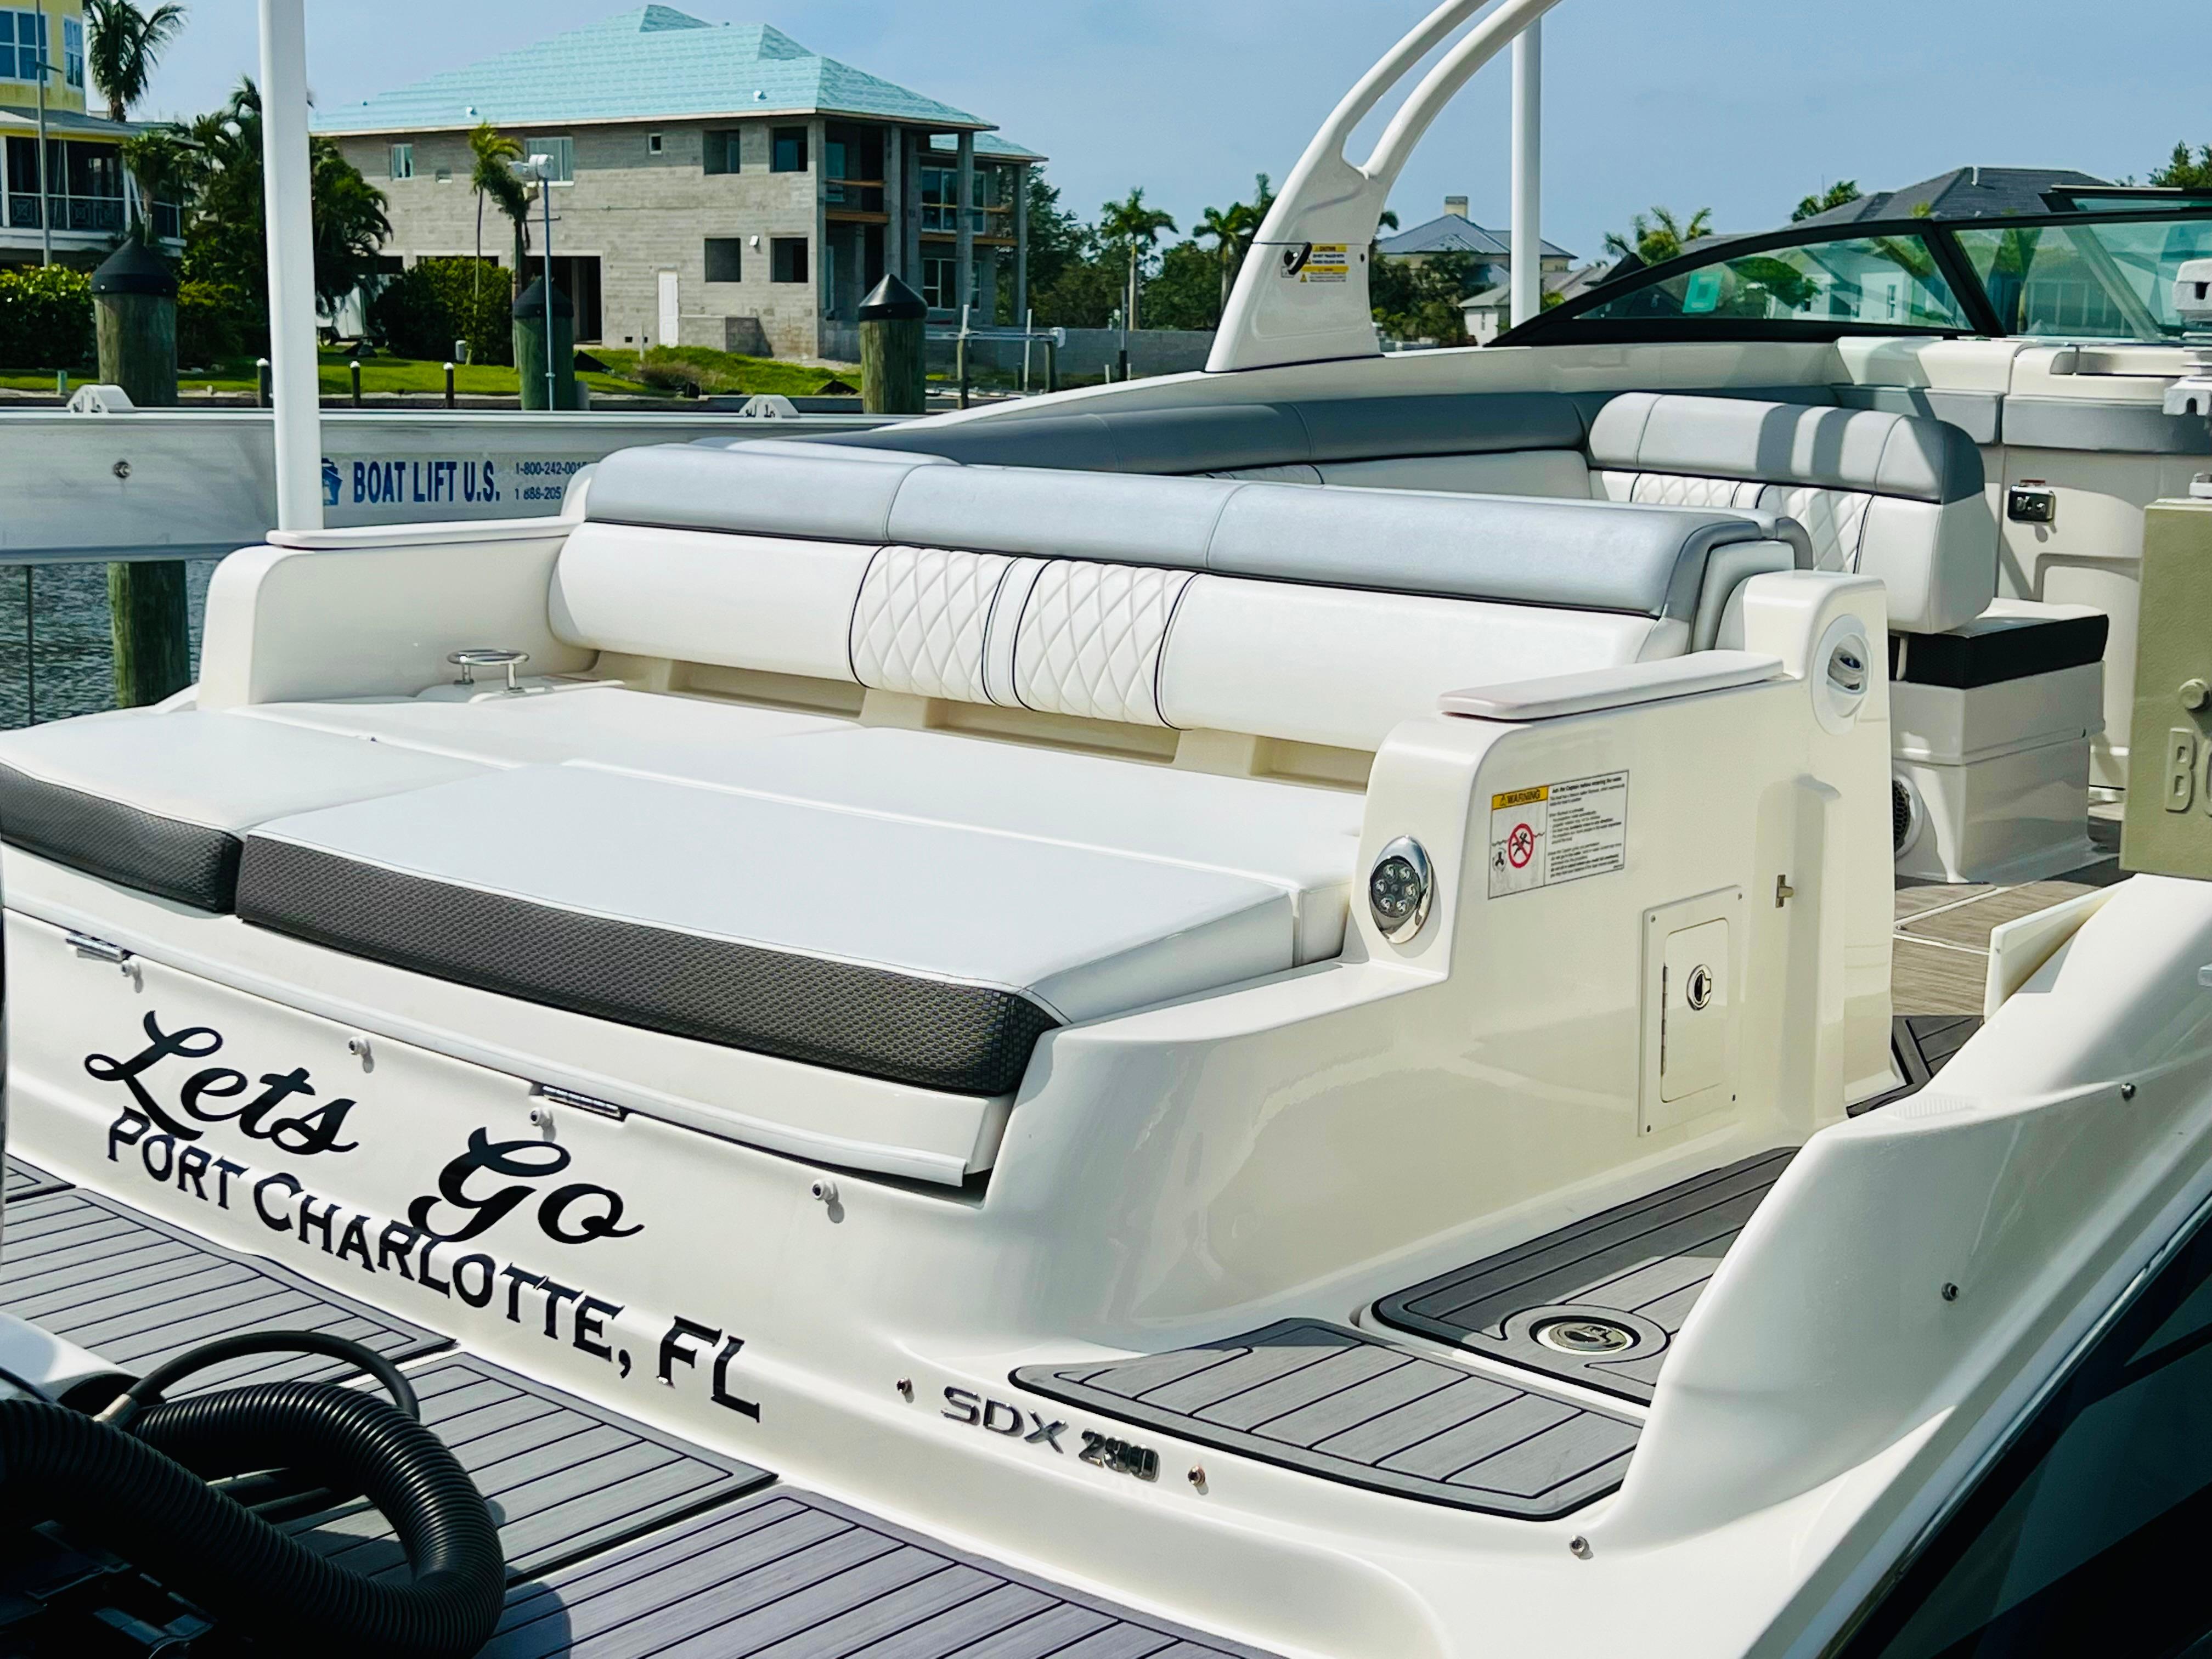 2017 Sea Ray SDX 290 Outboard Deck for sale - YachtWorld